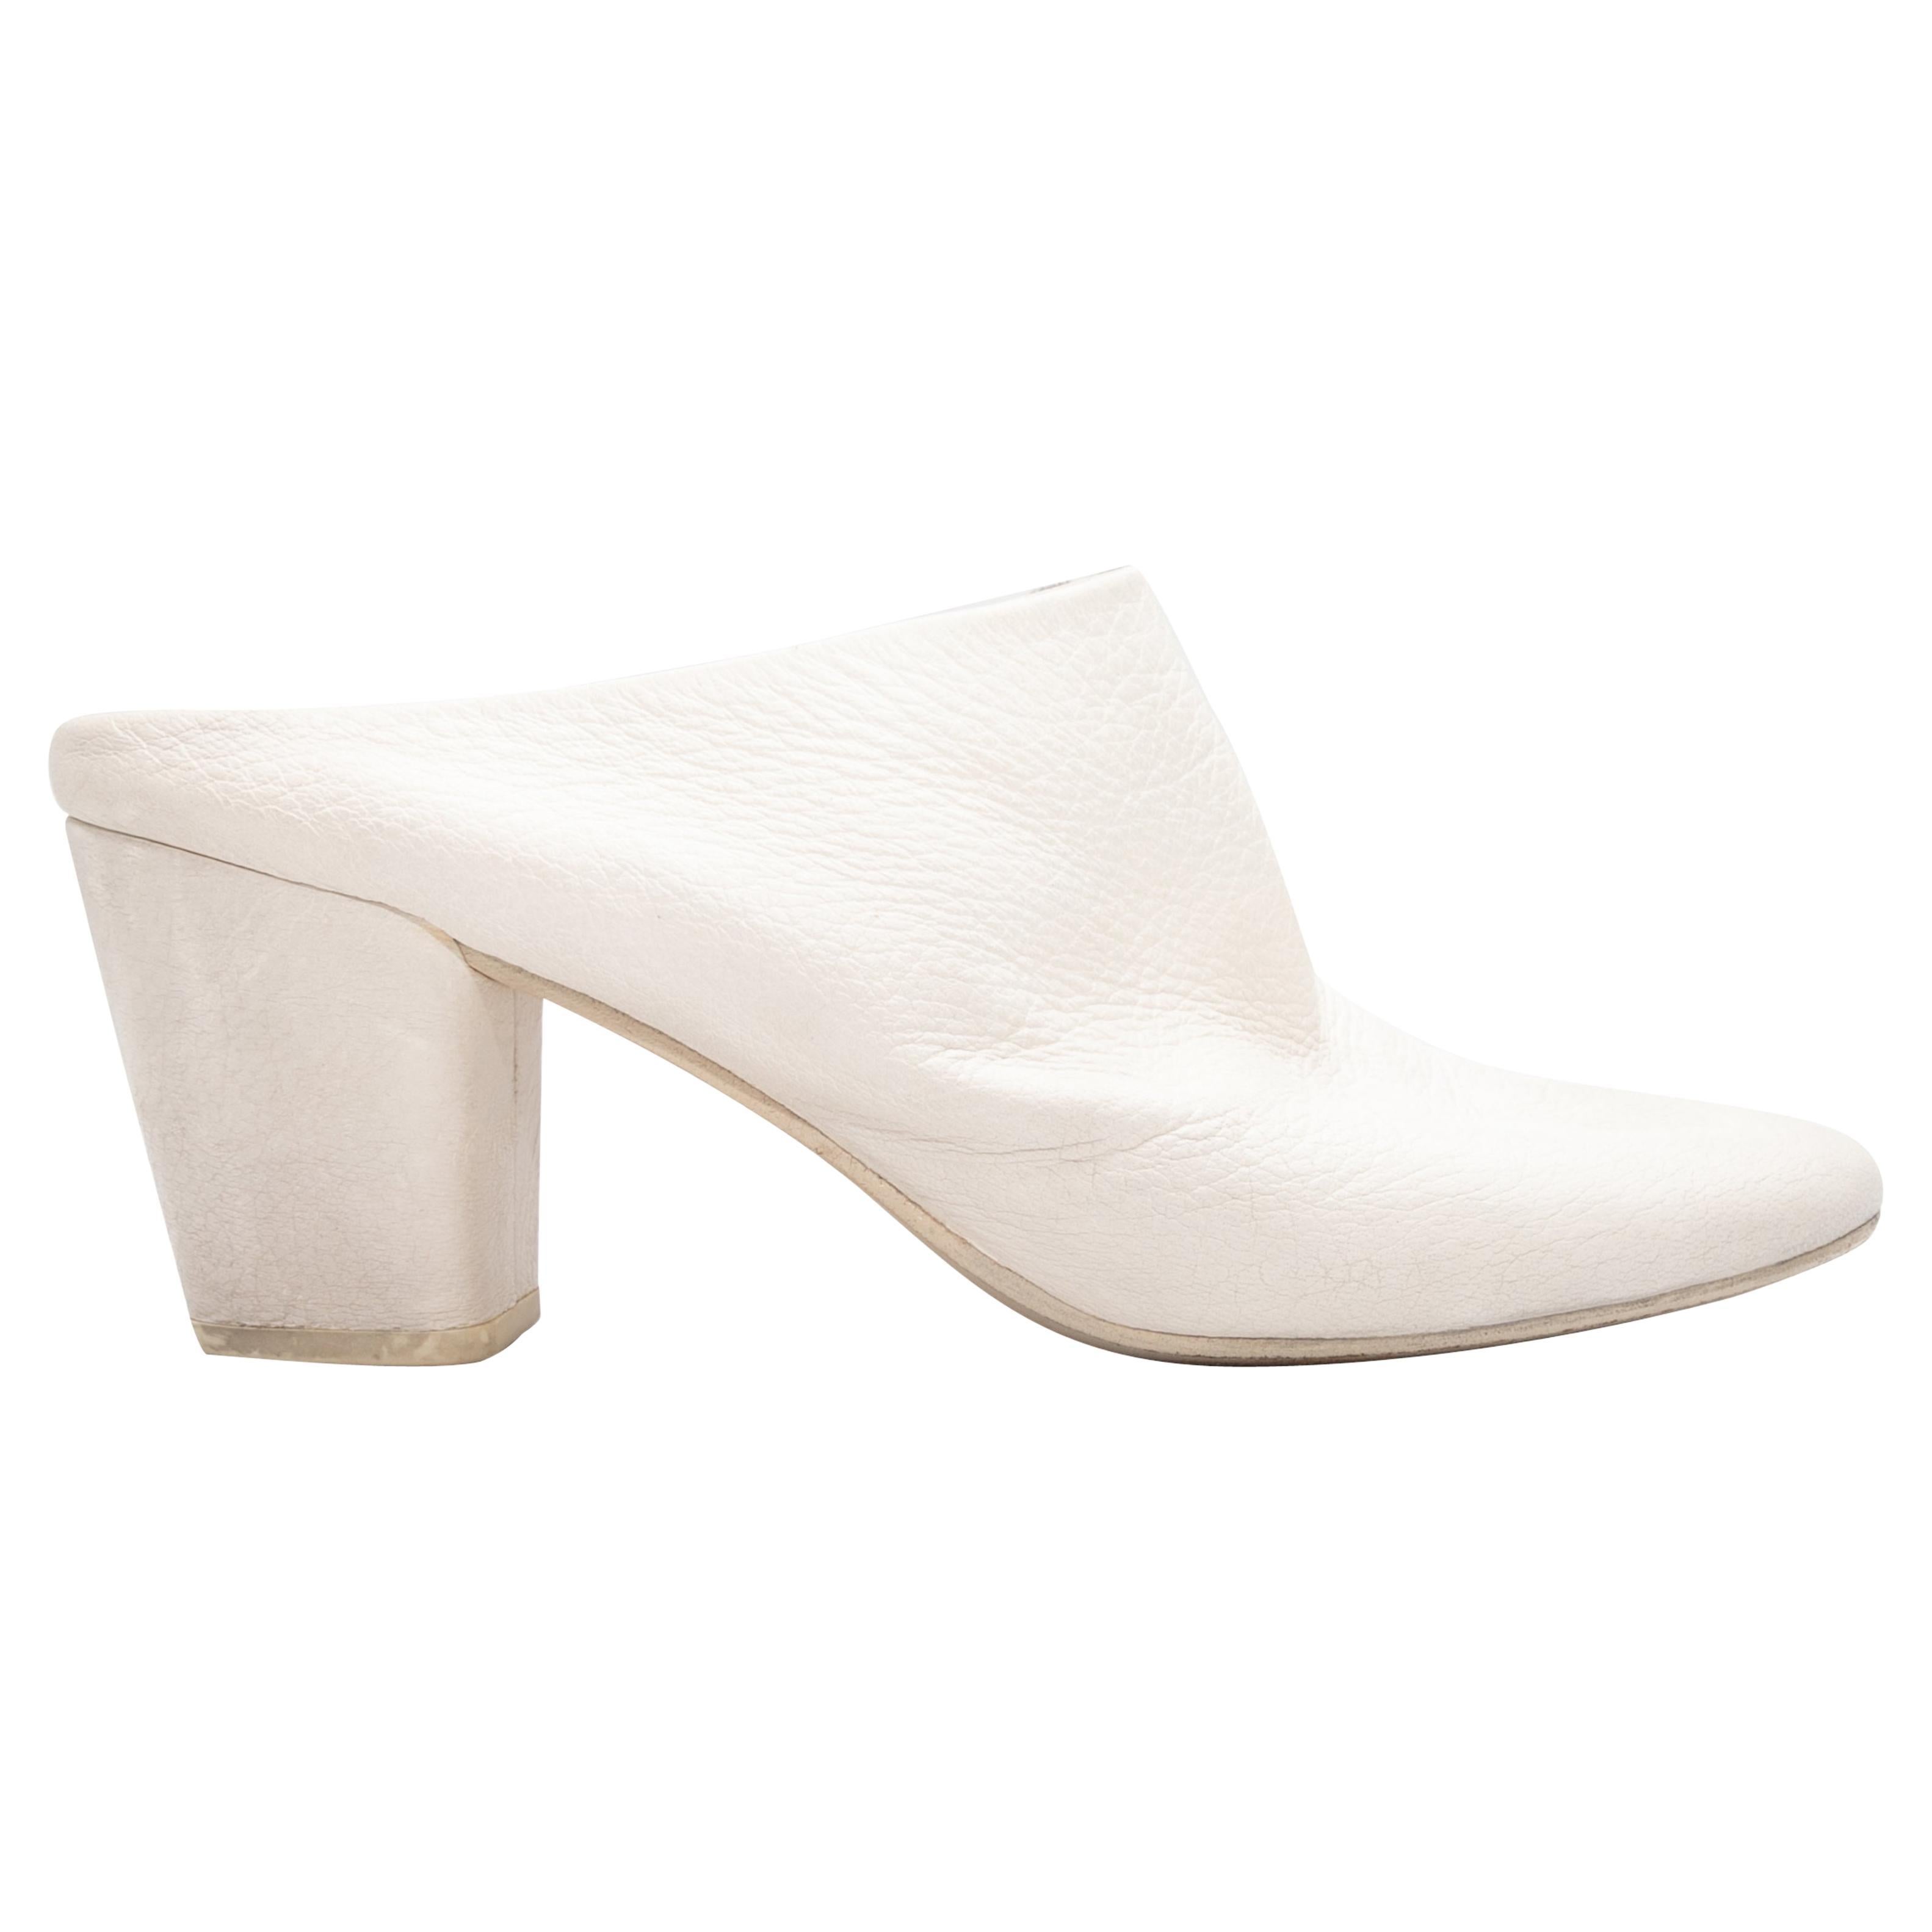 White Marsell Leather Heeled Mules Size 38